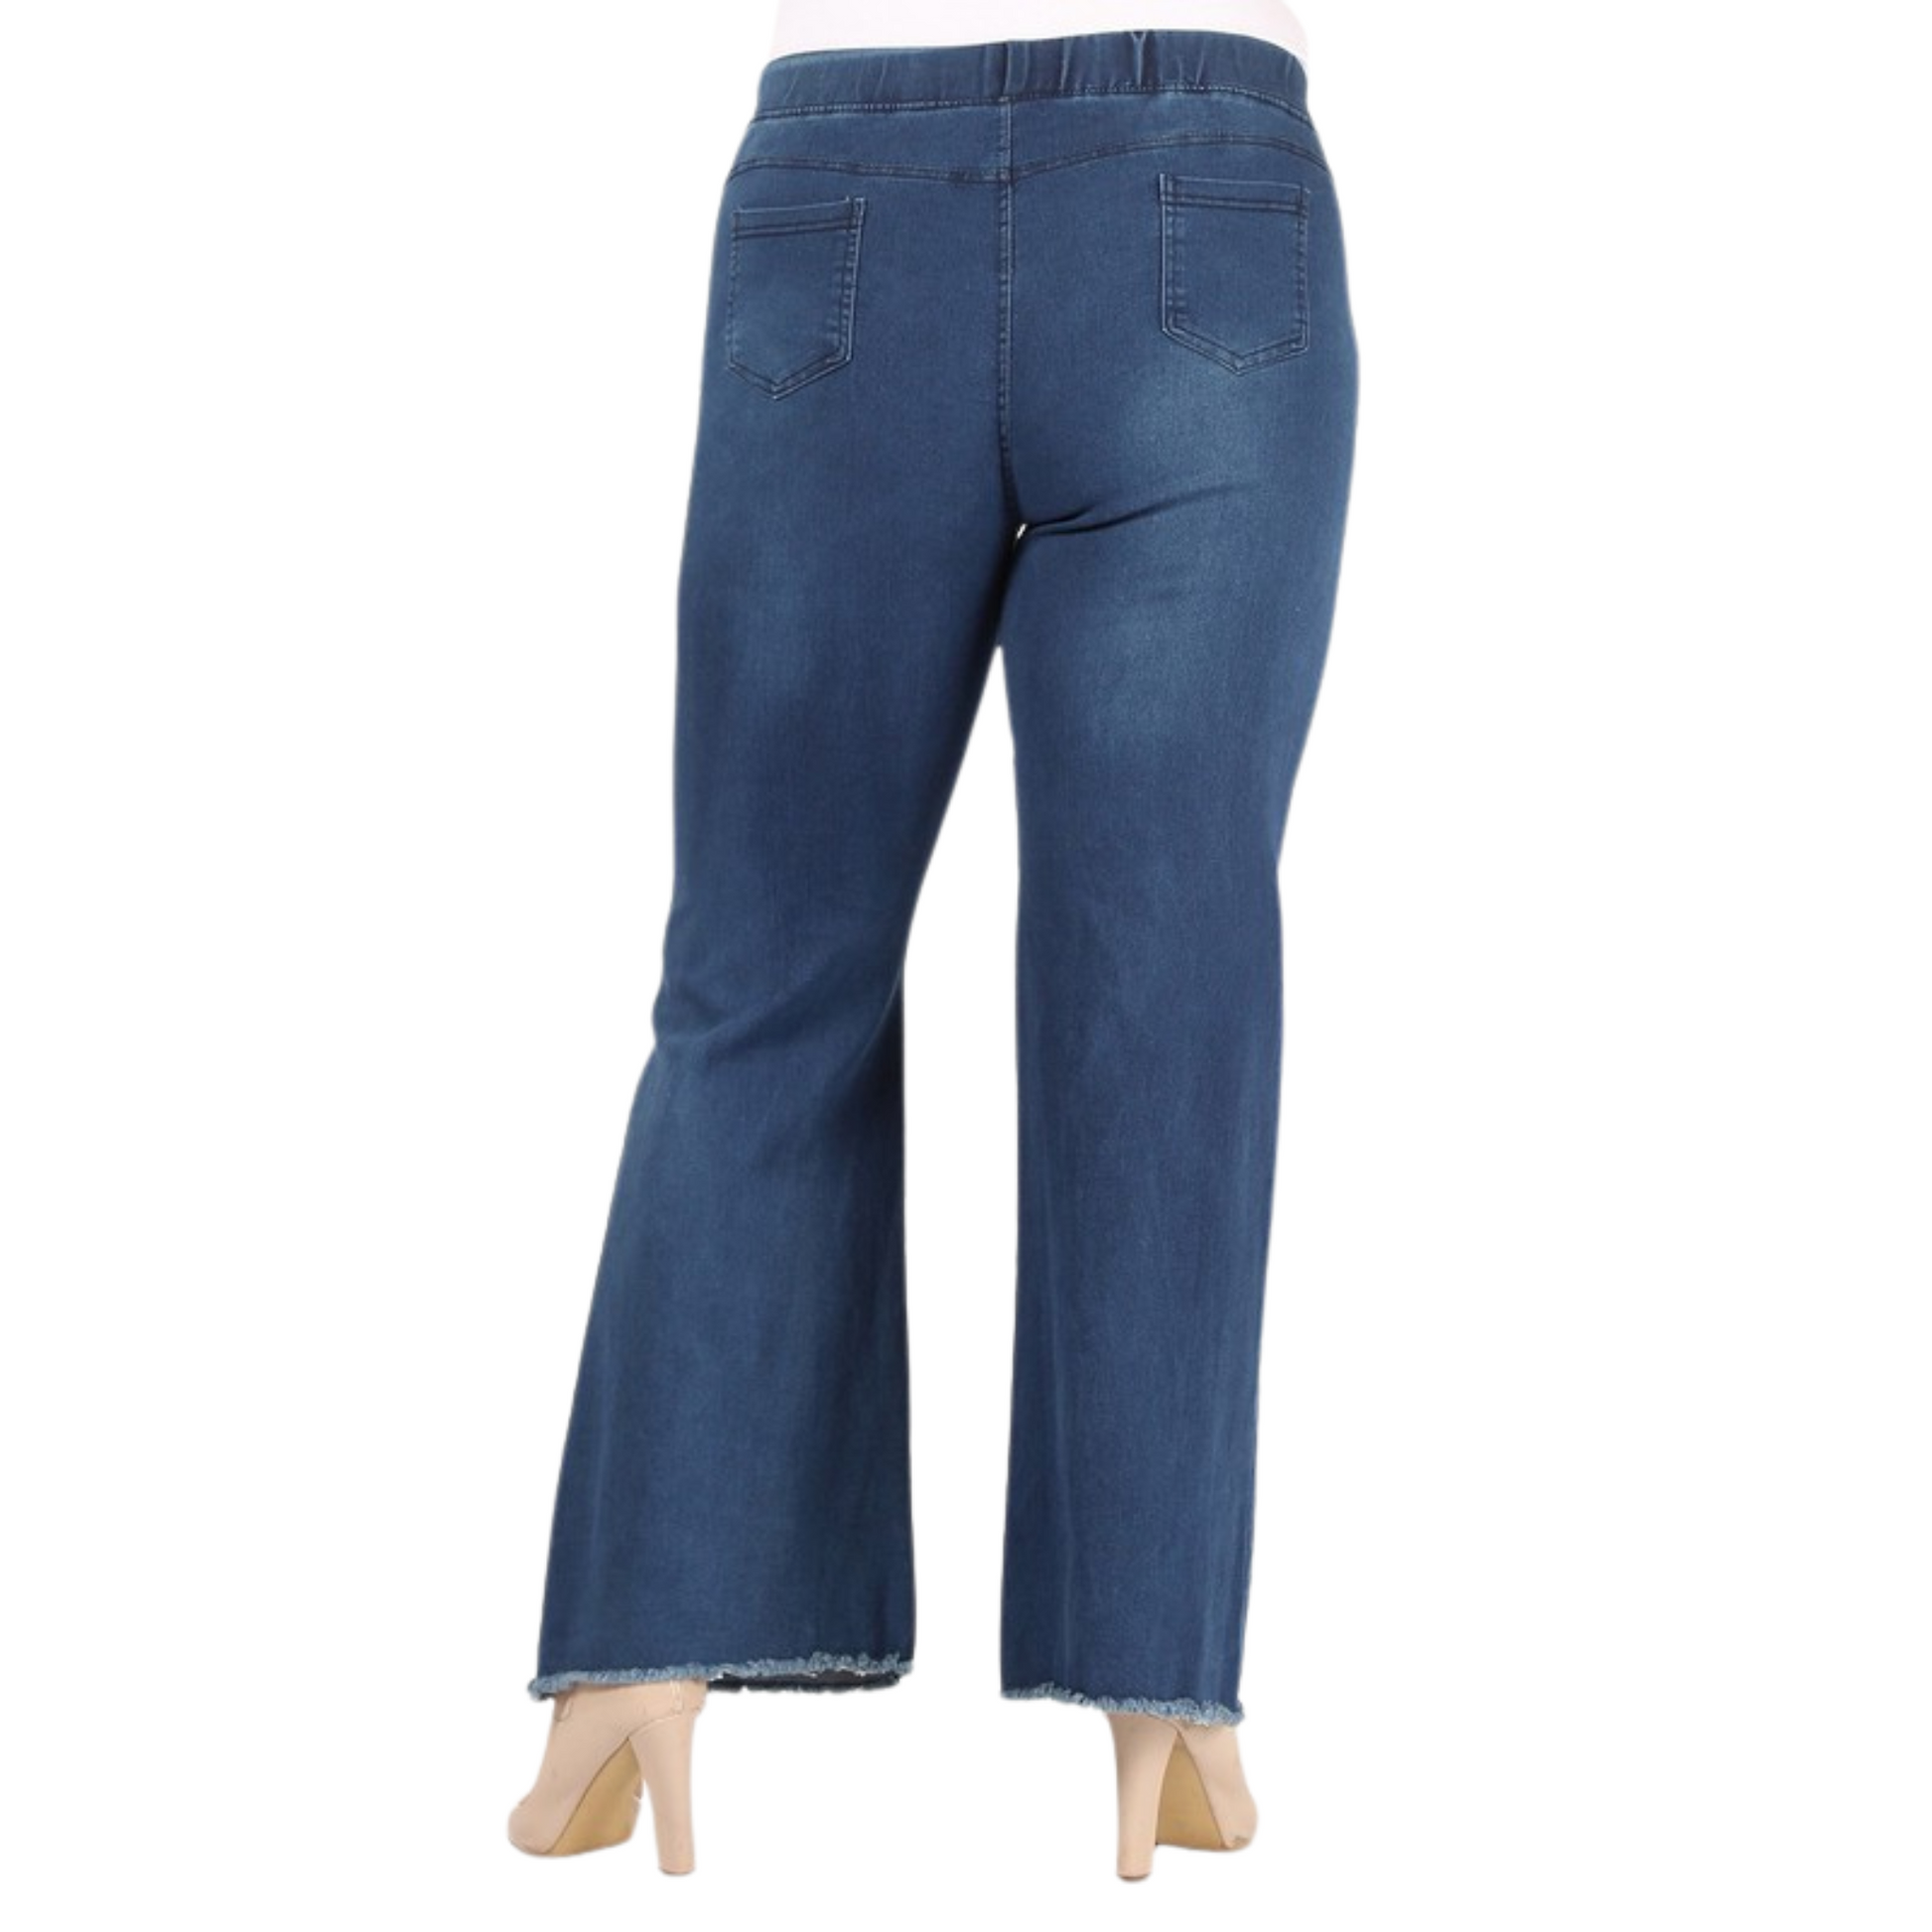 Stay comfortable and stylish with our High Waisted Flare Jeggings. Available in plus sizes, the dark wash and comfortable fit make these jeggings perfect for a variety of looks. Crafted with your comfort in mind, you'll love wearing these all day.